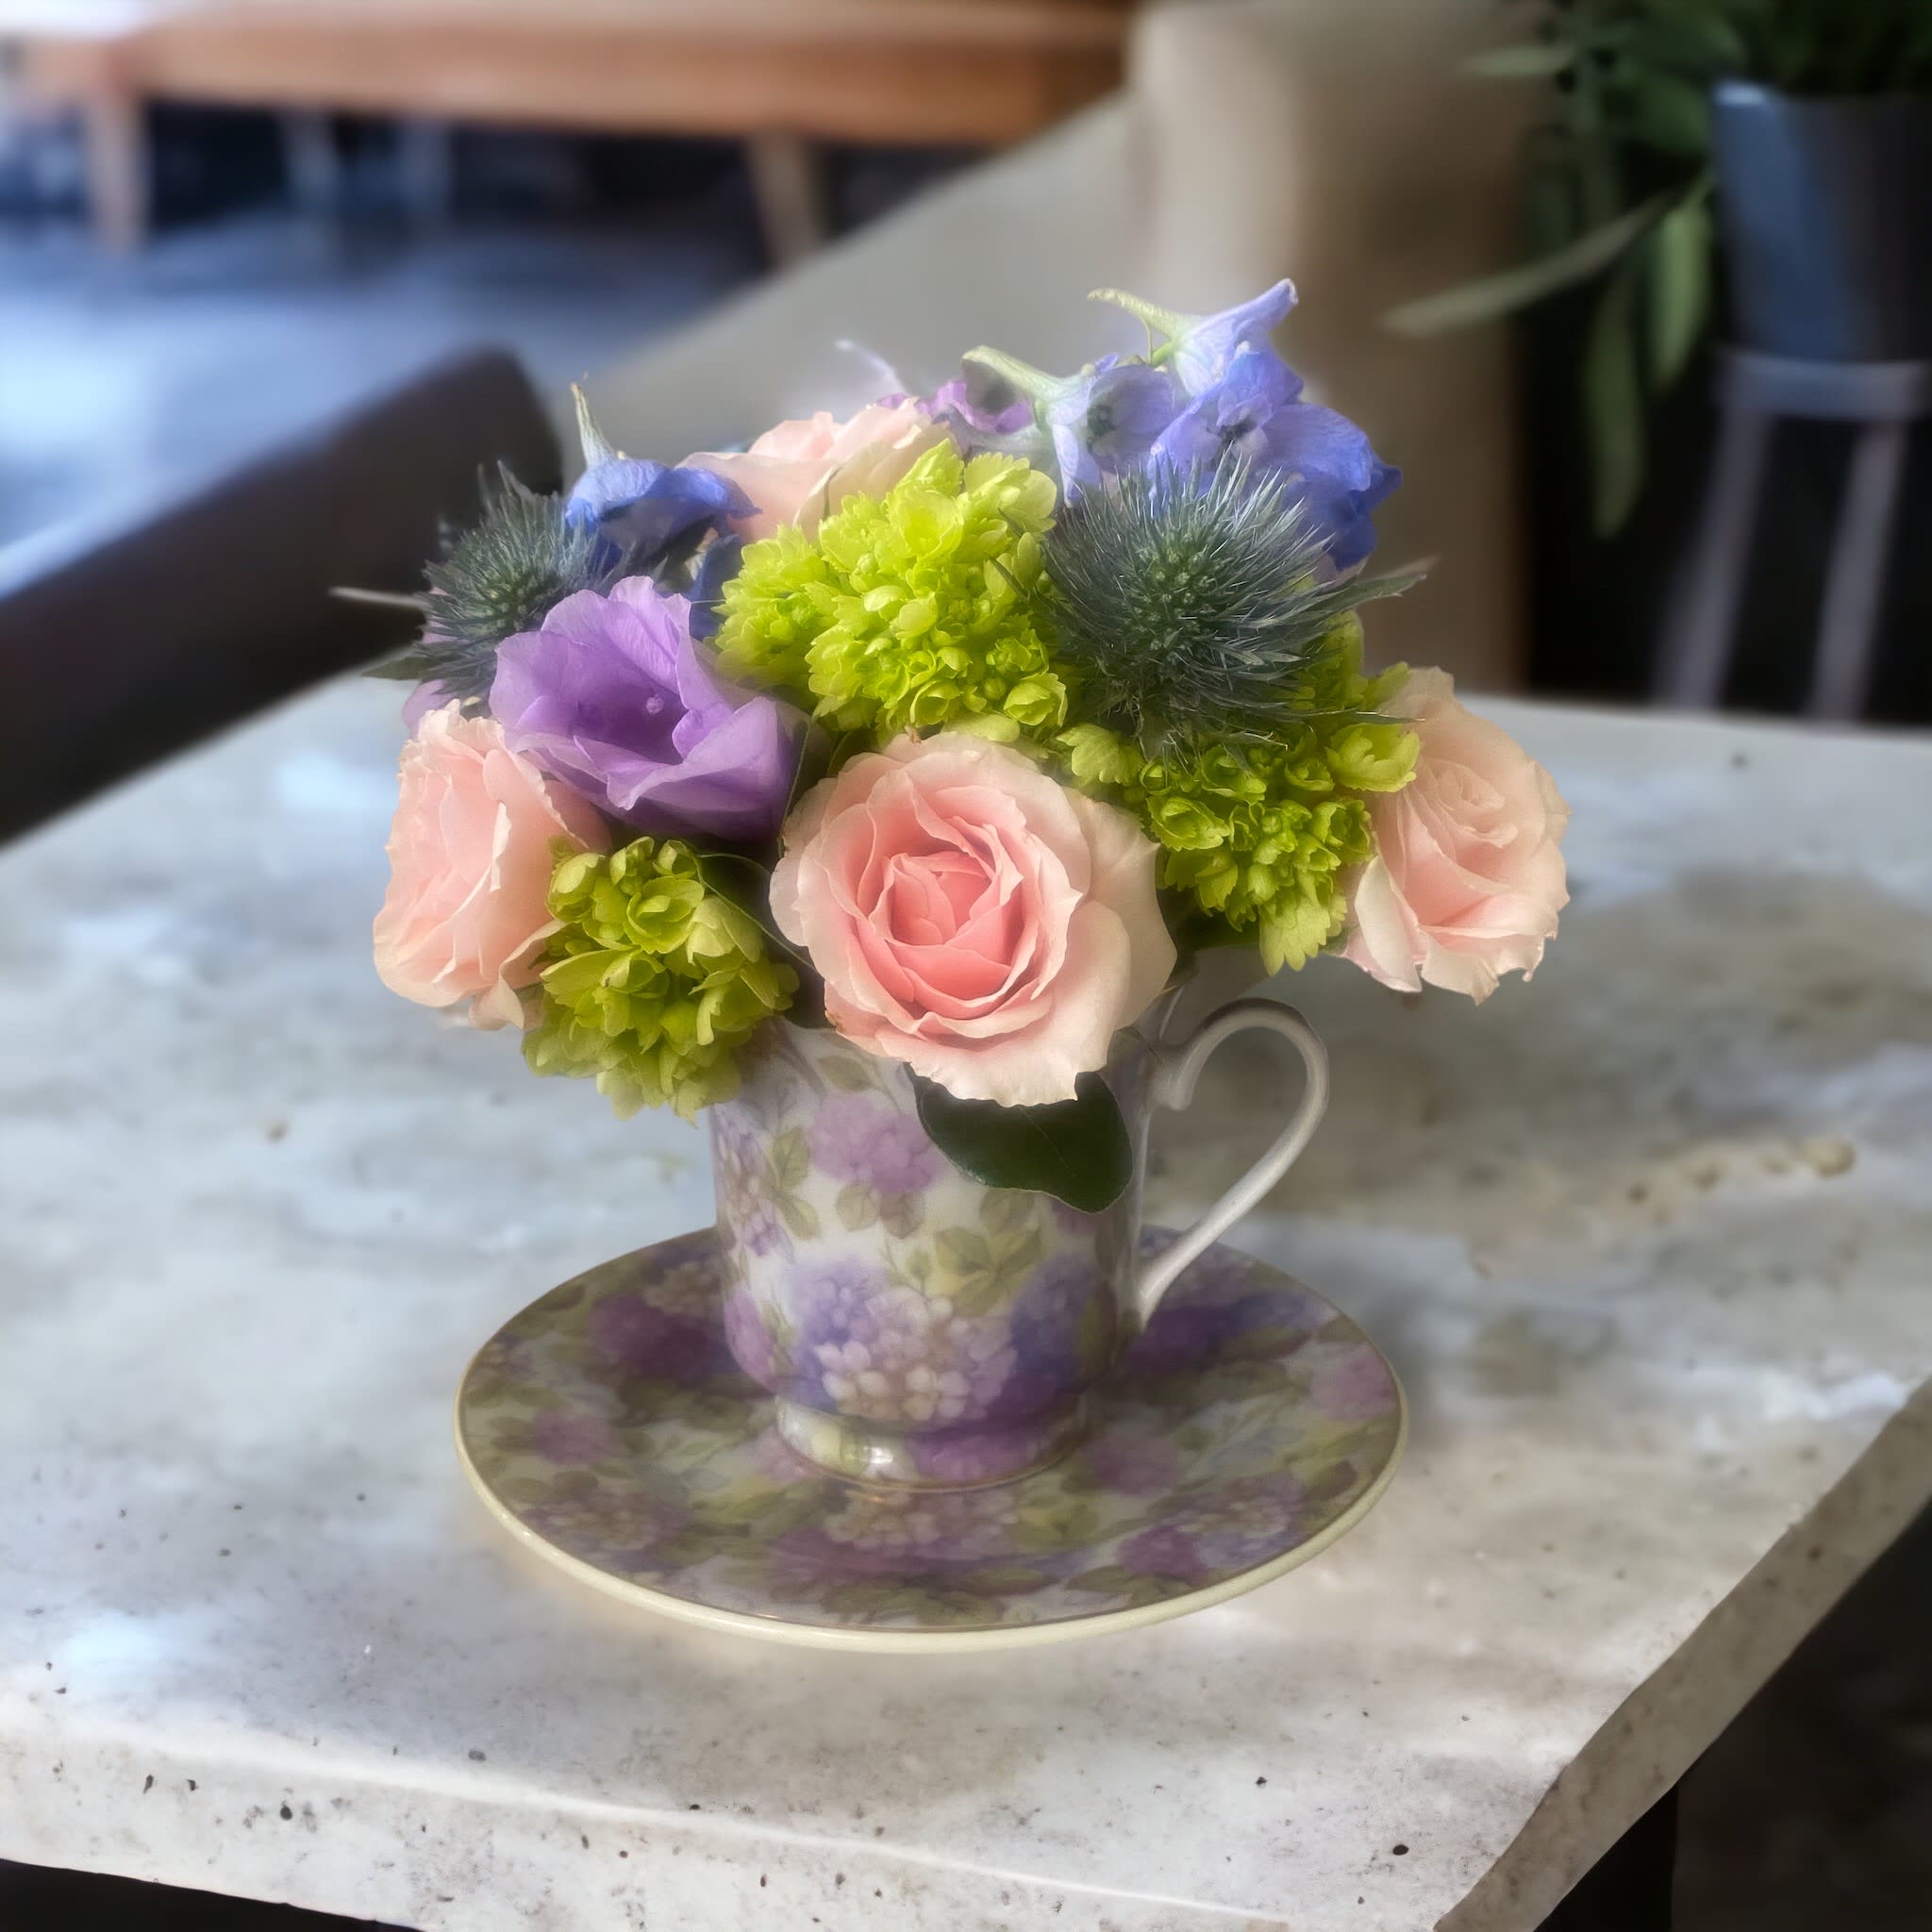 You're My Cup of Tea - Send a lovely teacup brimming with flowers, the perfect gift for a tea lover, NOTE: Colors and flowers may vary.